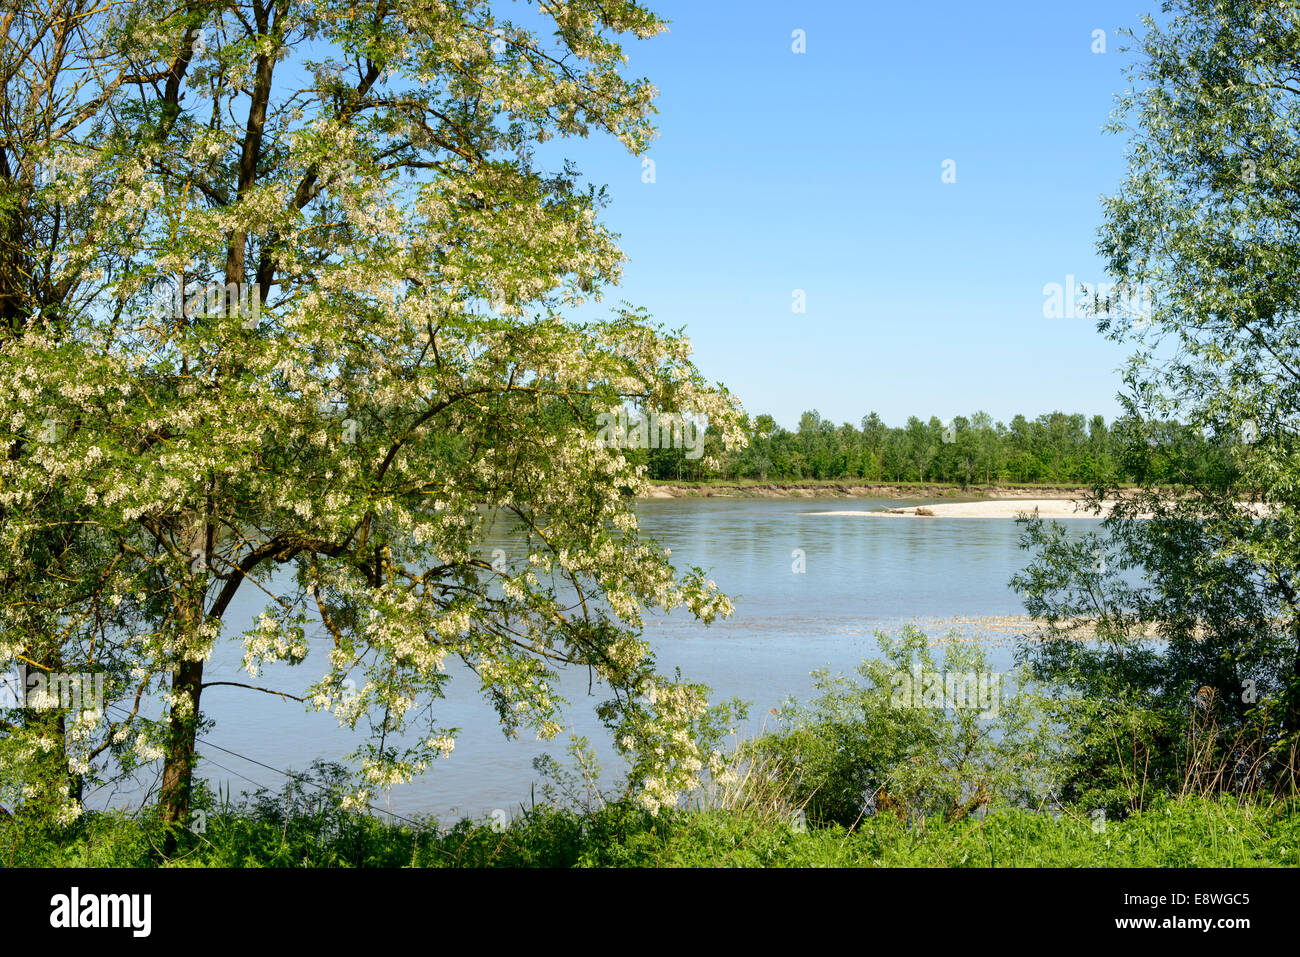 river landscape with sand banks and shallow calm water, shot in sunny springtime with a blossoming tree  in the fore ground Stock Photo